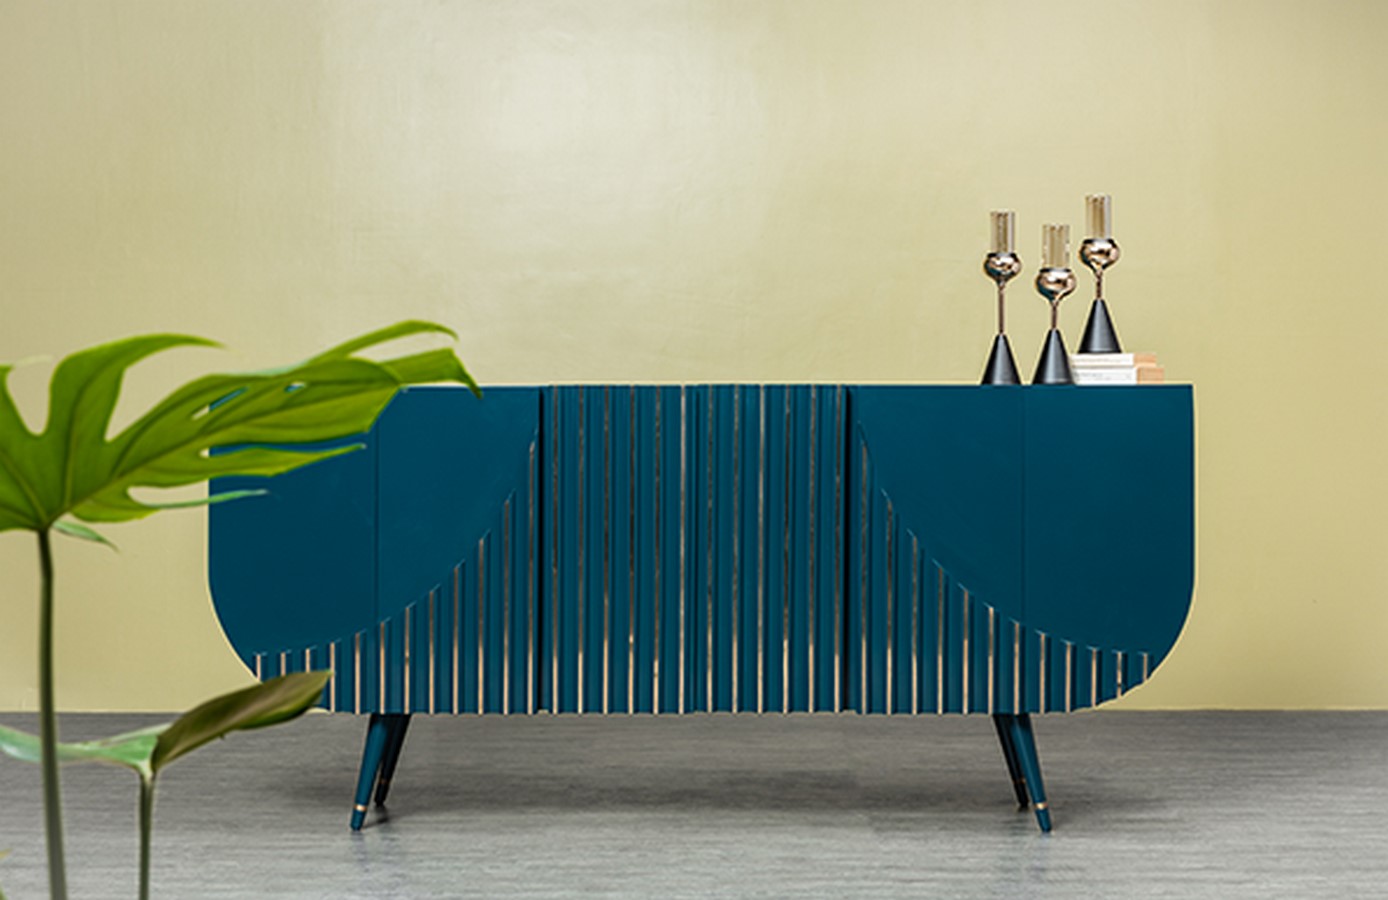 10 Furniture Designers everyone should know - Sheet13